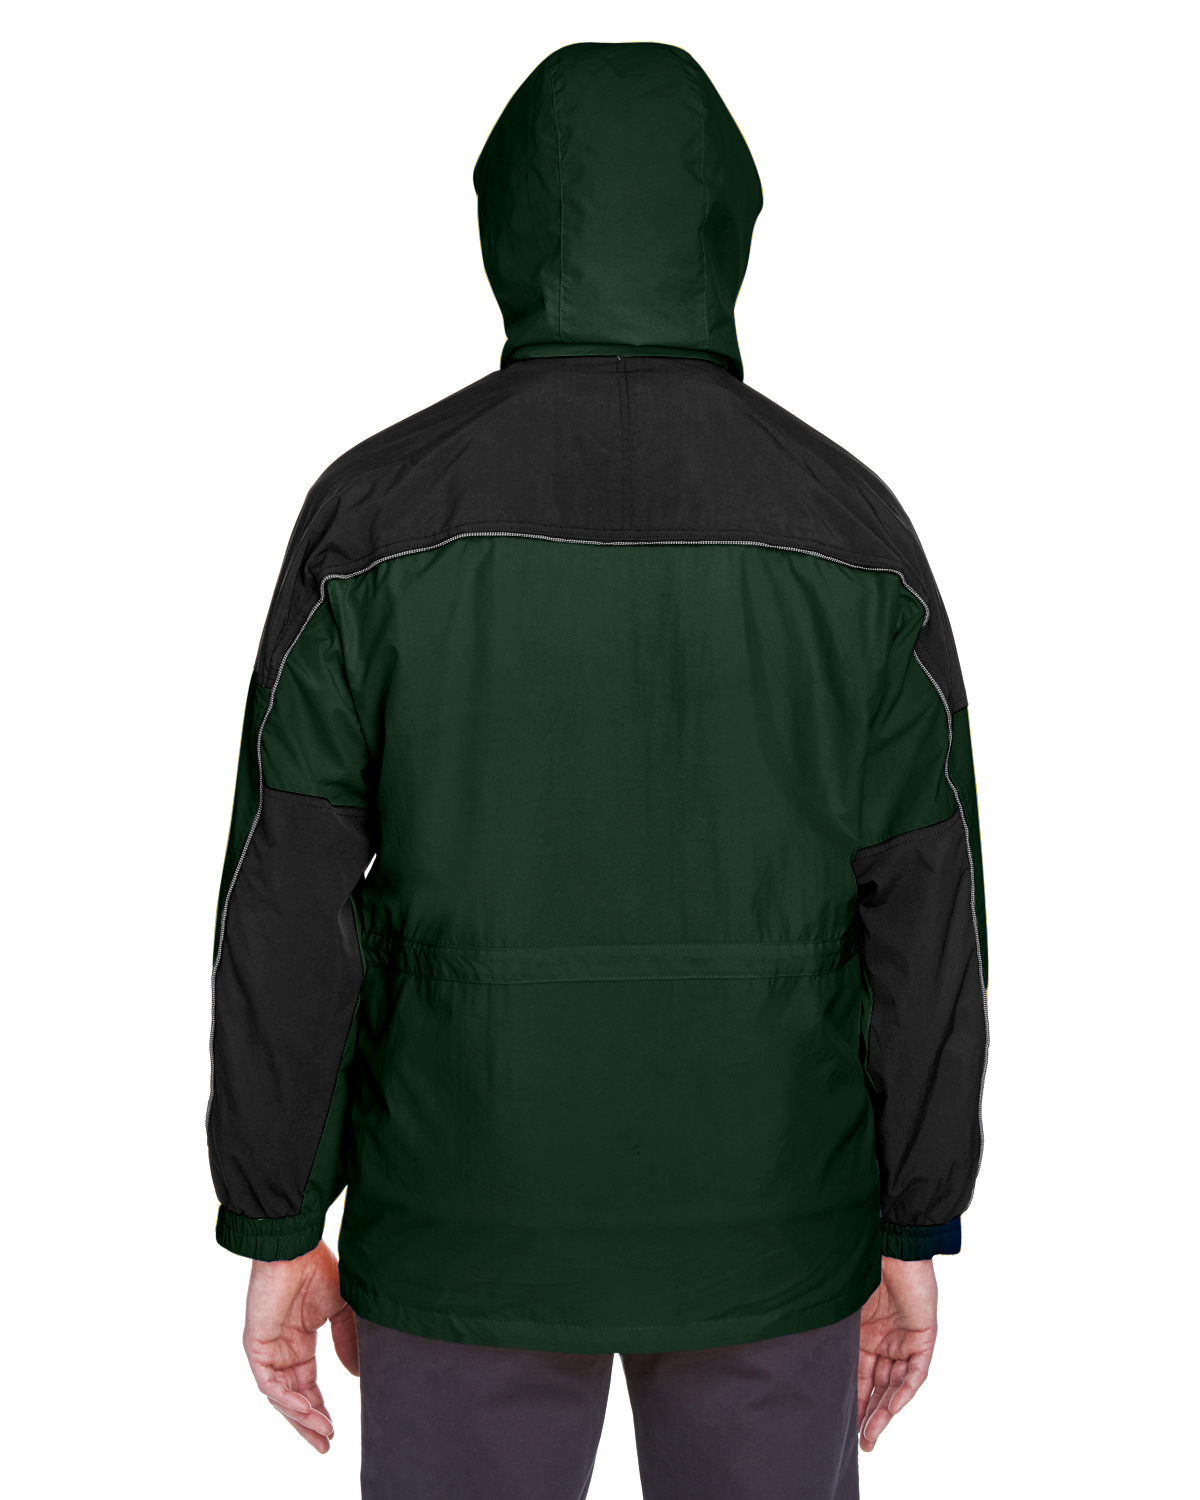 Ash City North End 88006 Adult 3 In 1 Two Tone Parka | Jiffy Shirts